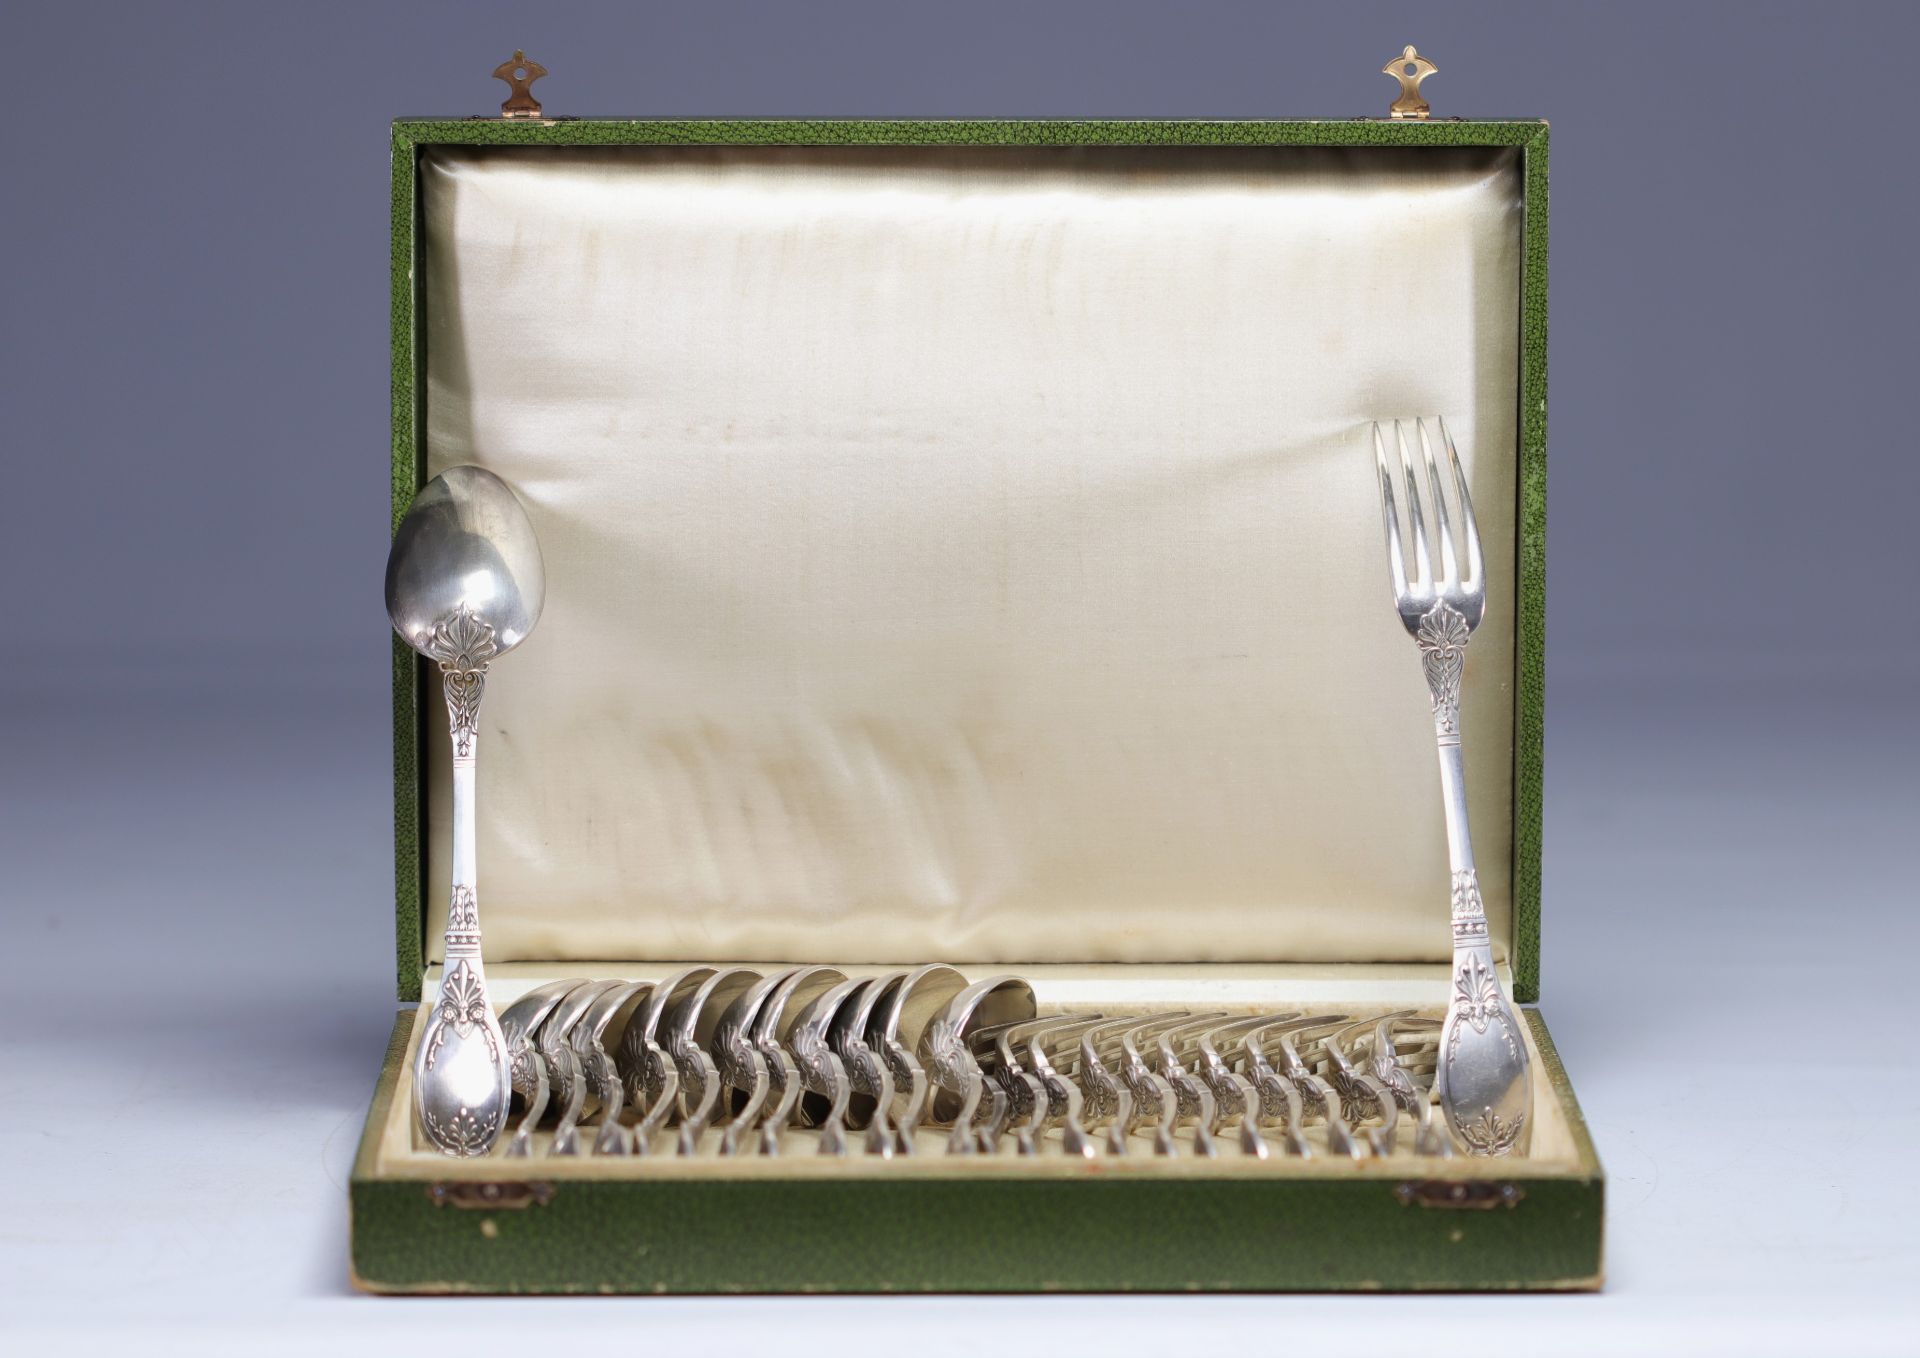 CAILAR BAYARD, Empire style boxed set of 24 silver plated cutlery, forks and spoons.